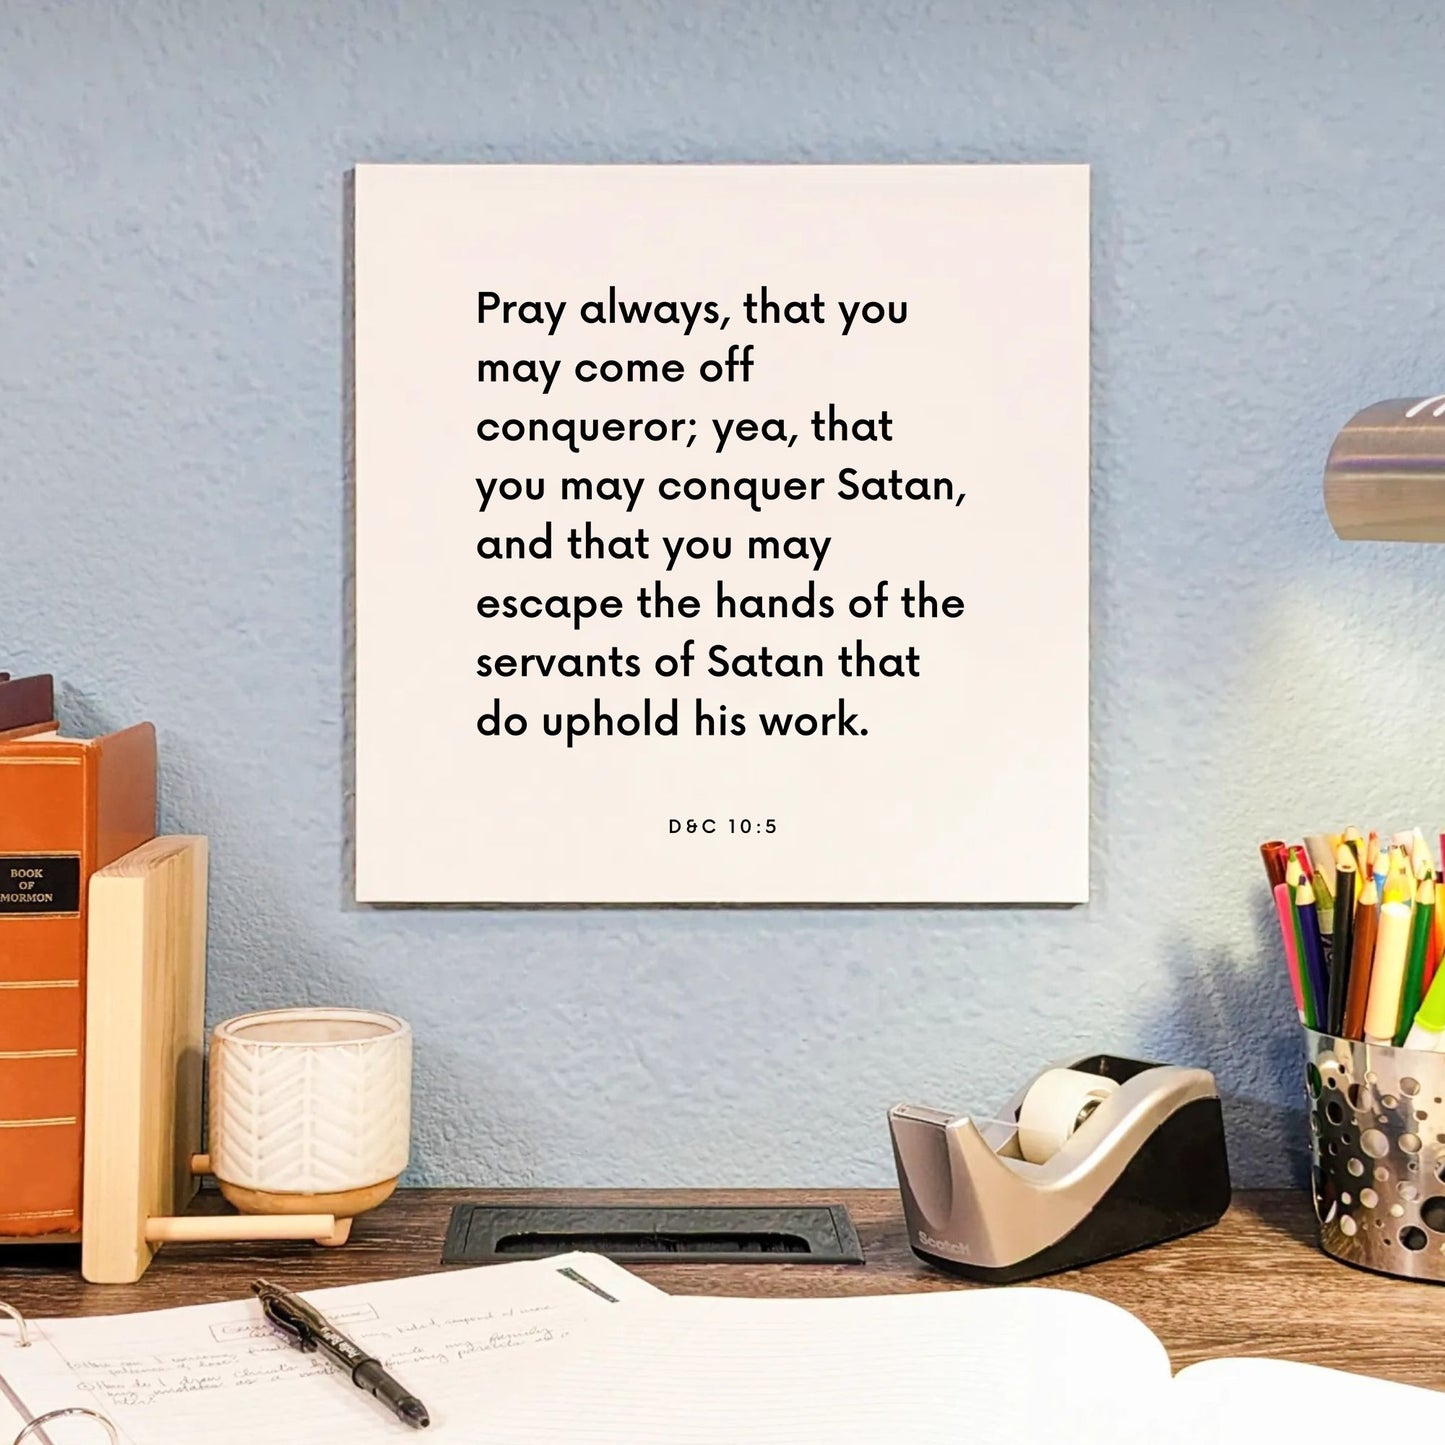 Desk mouting of the scripture tile for D&C 10:5 - "Pray always, that you may come off conqueror"